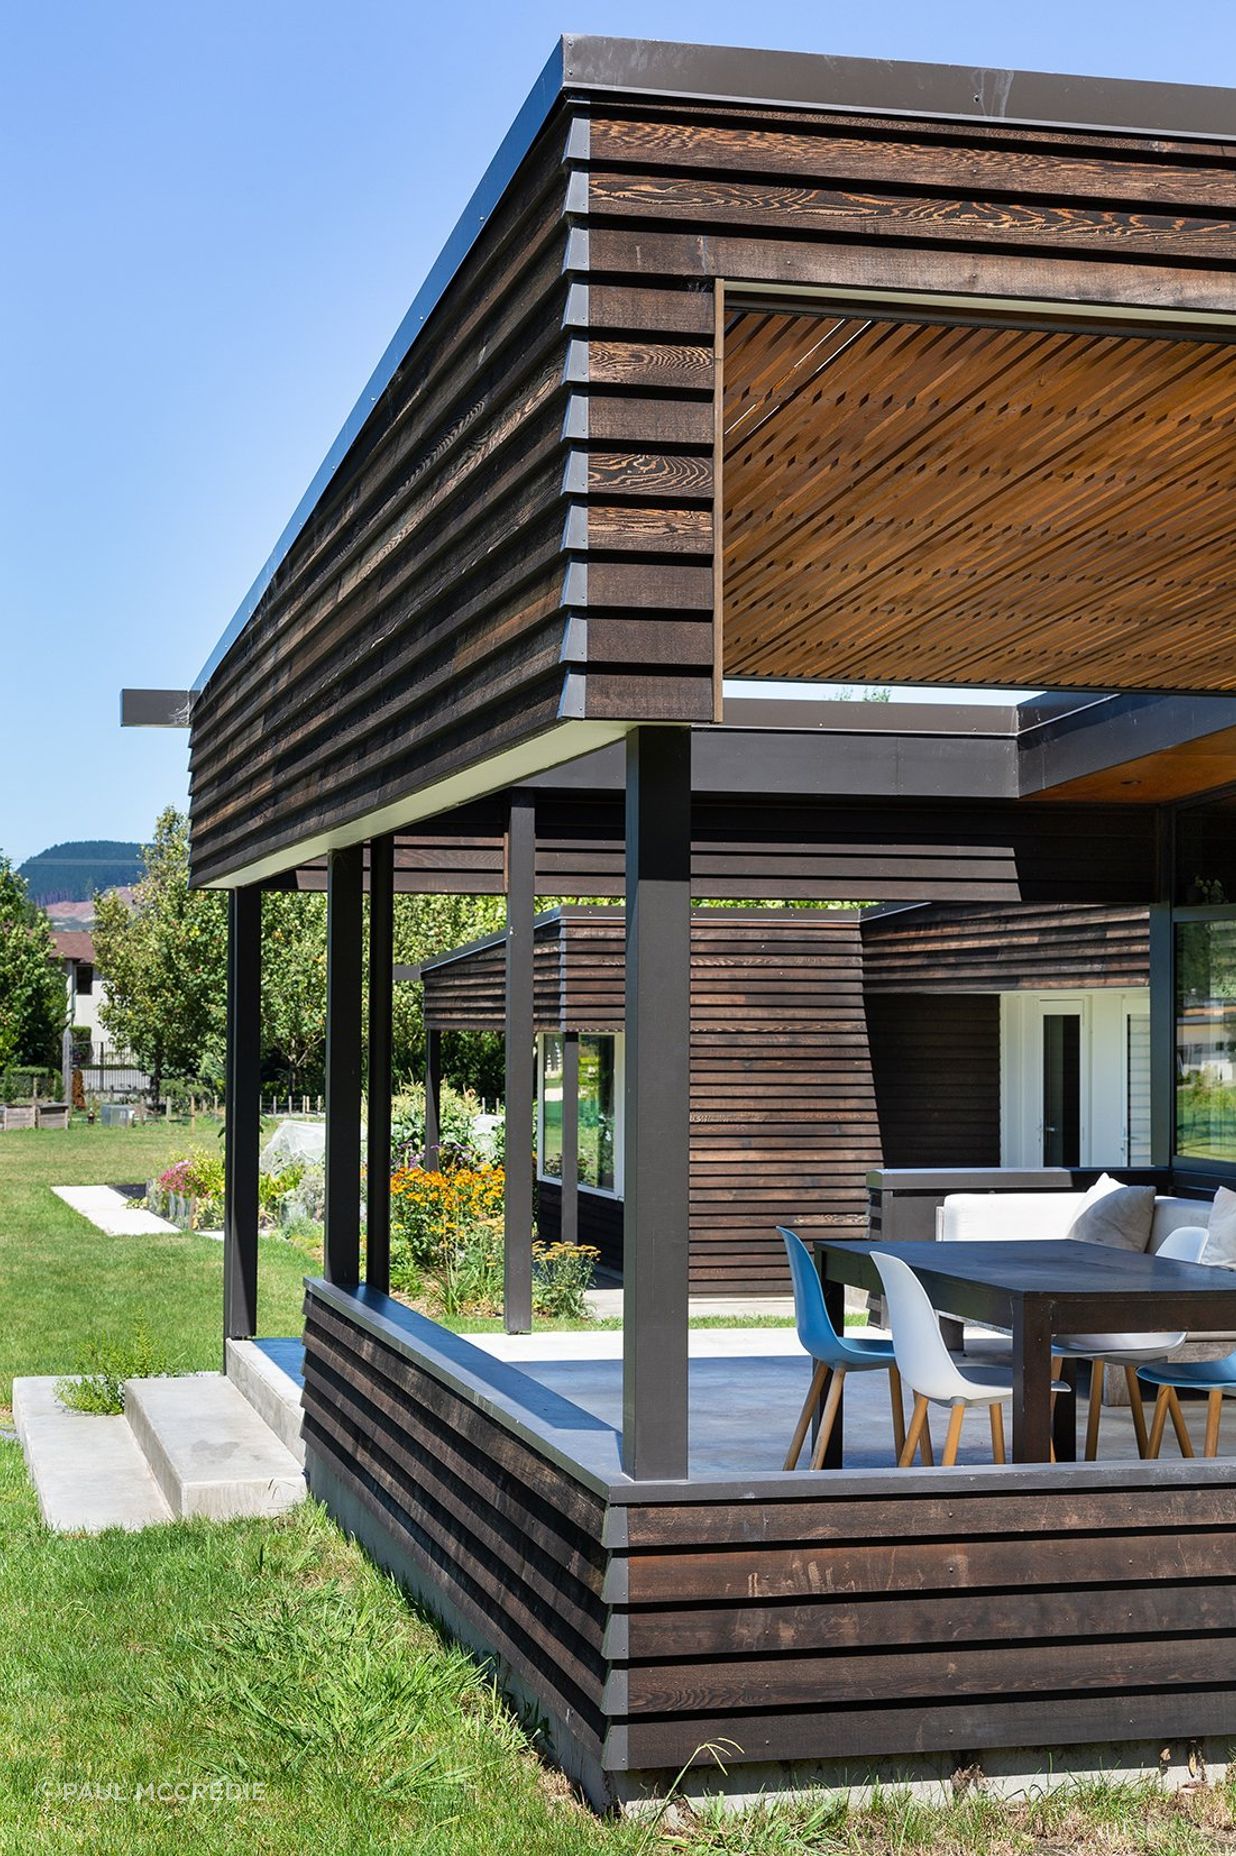  This outdoor space connects the interior and exterior spaces whilst providing shade. 